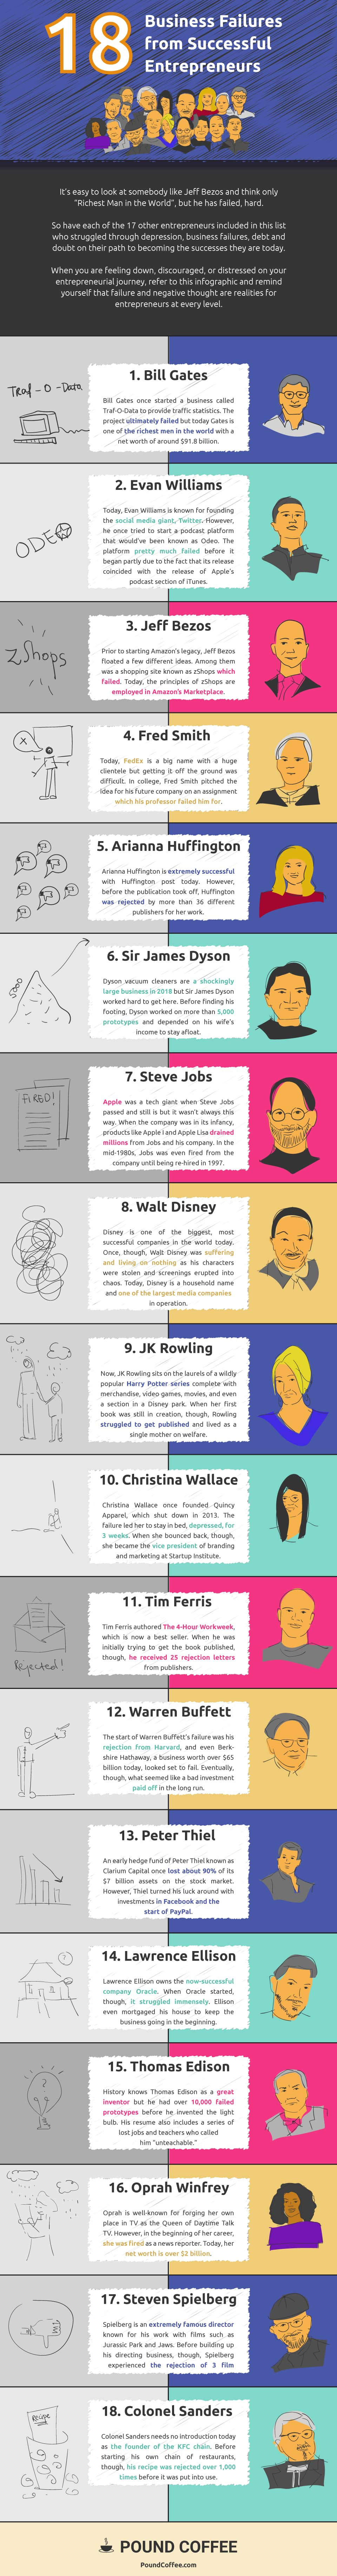 Successful Entrepreneurs Who Failed (INFOGRAPHIC)